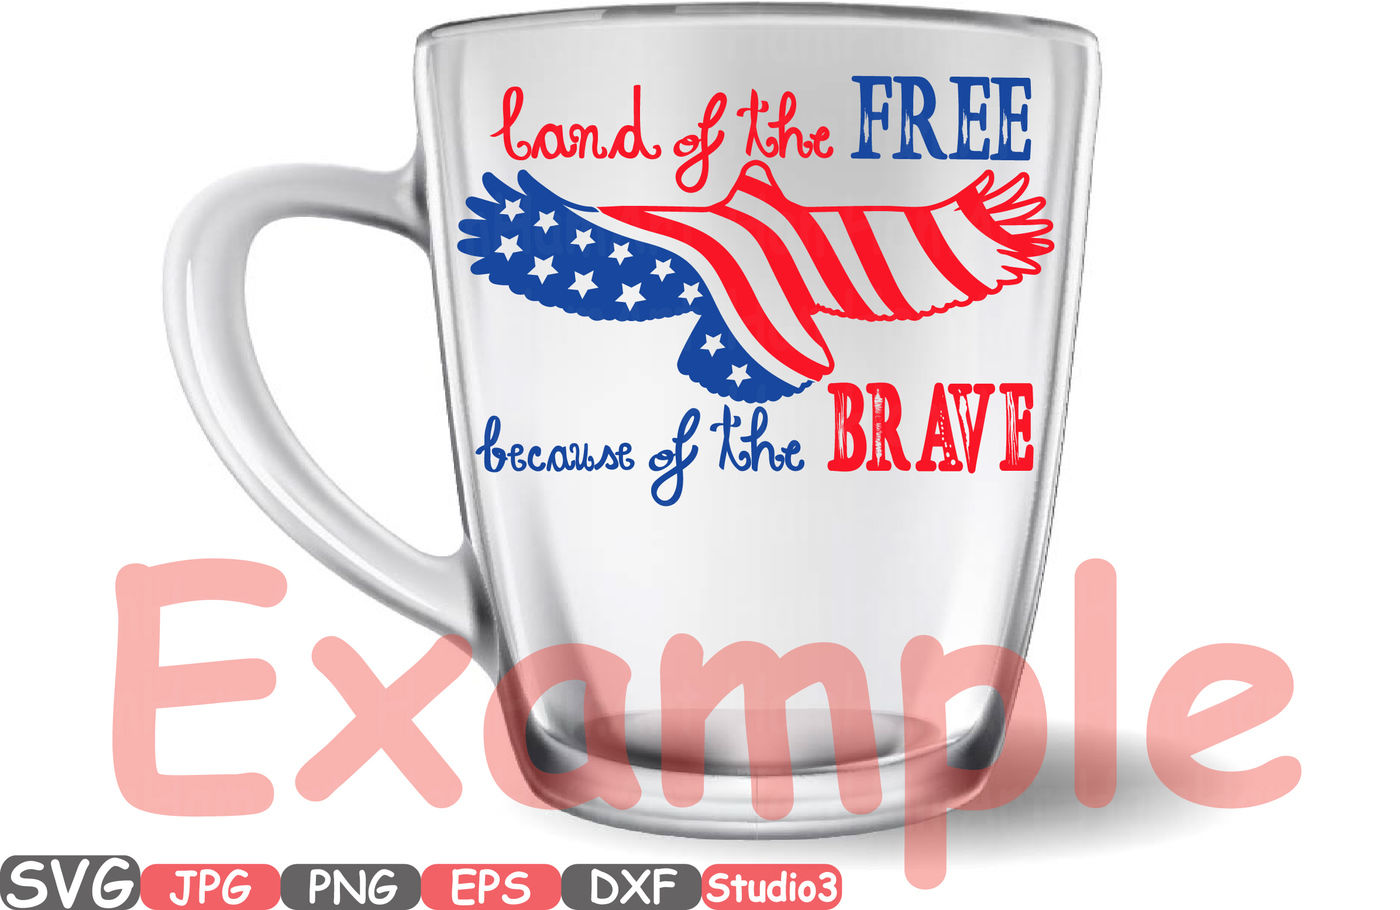 ori 82831 795e96ceb70a3c1519d9bda1cde768b5c9bb1f80 land of the free because of the brave quote silhouette svg independence studio3 american flag eagle flag eagles clipart 4th of july 497s